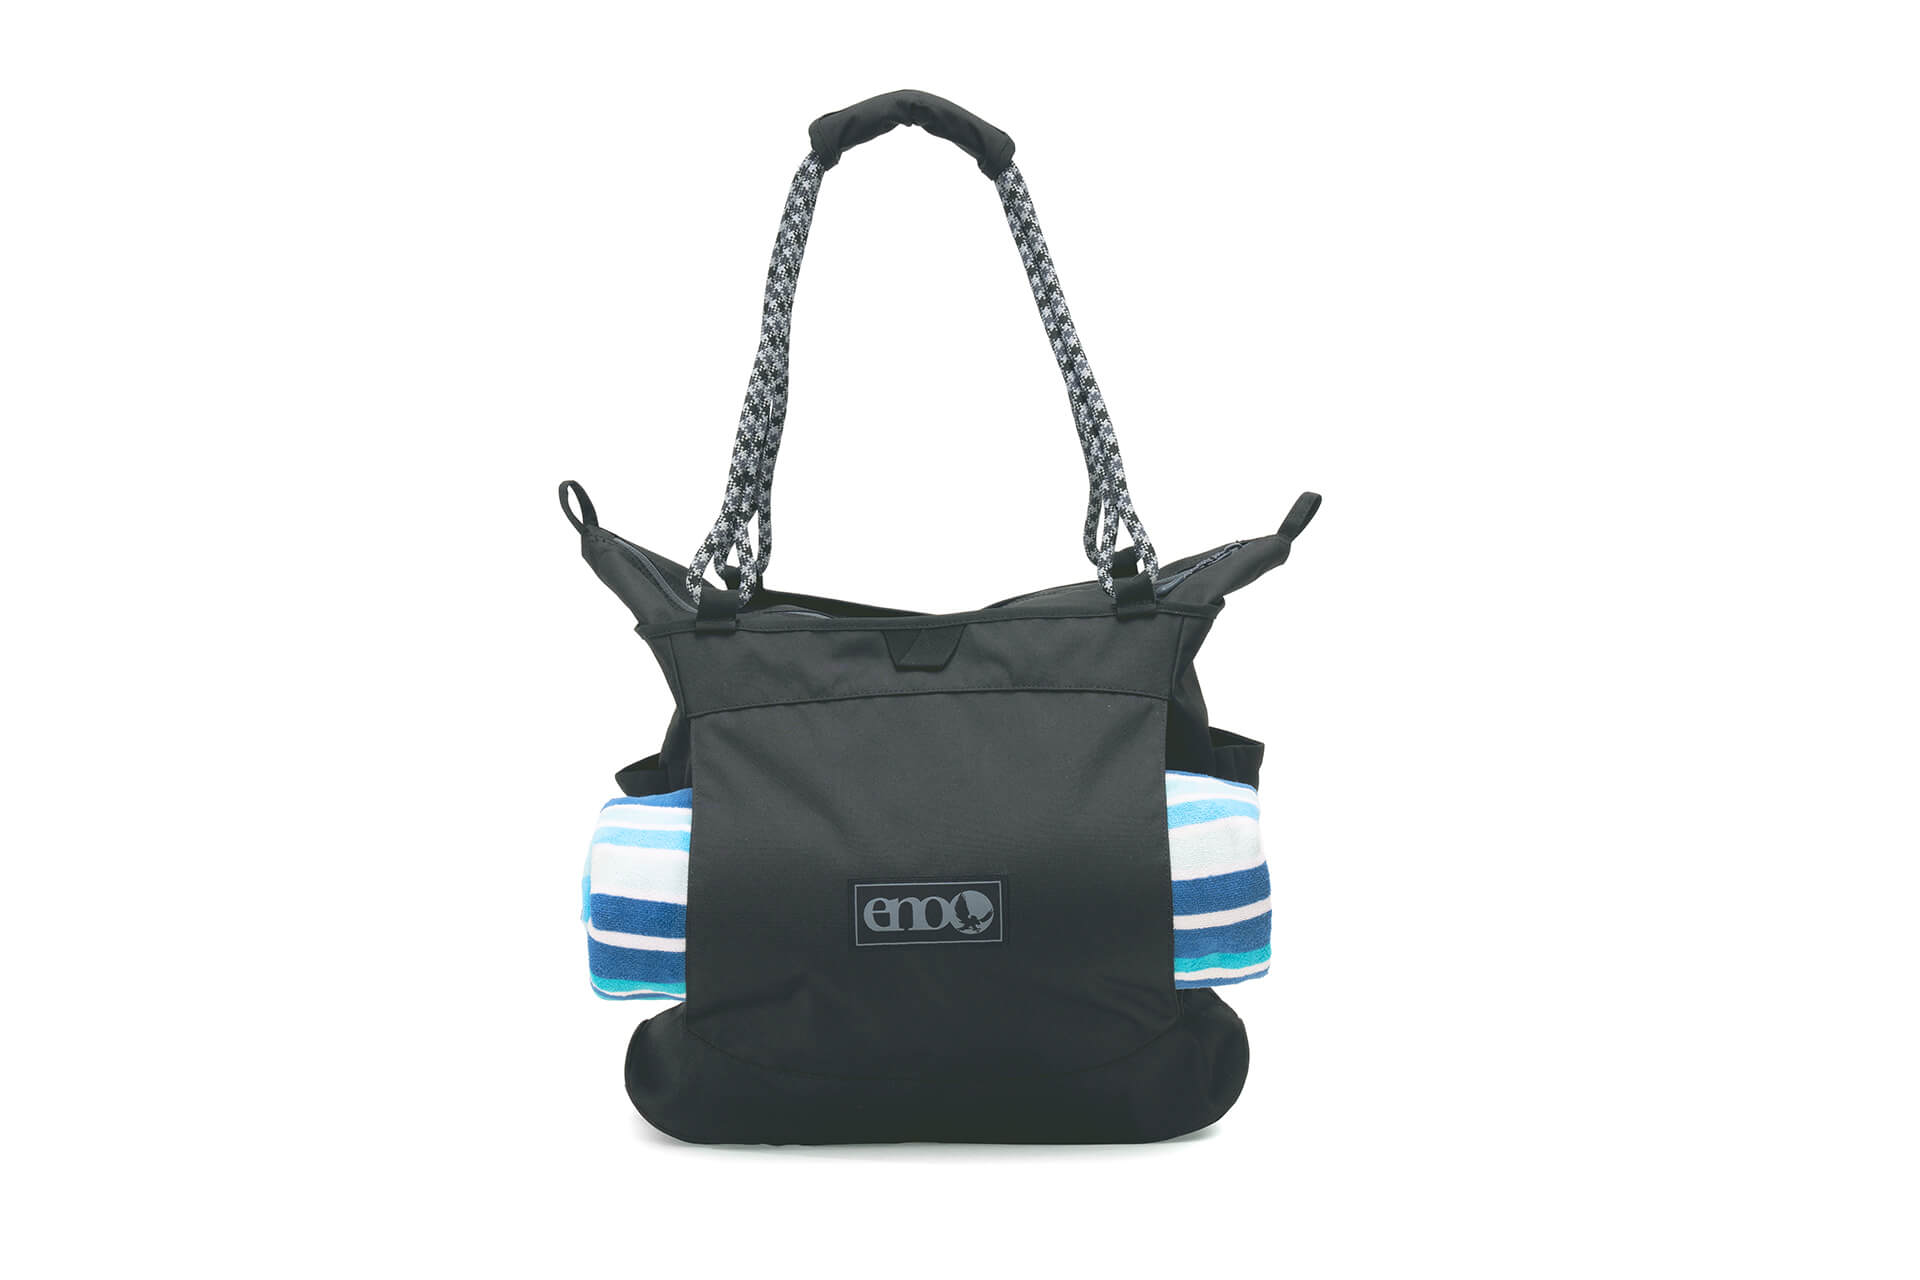 Eagles Nest Outfitters, Inc. Bags & Packs Relay™ Tote